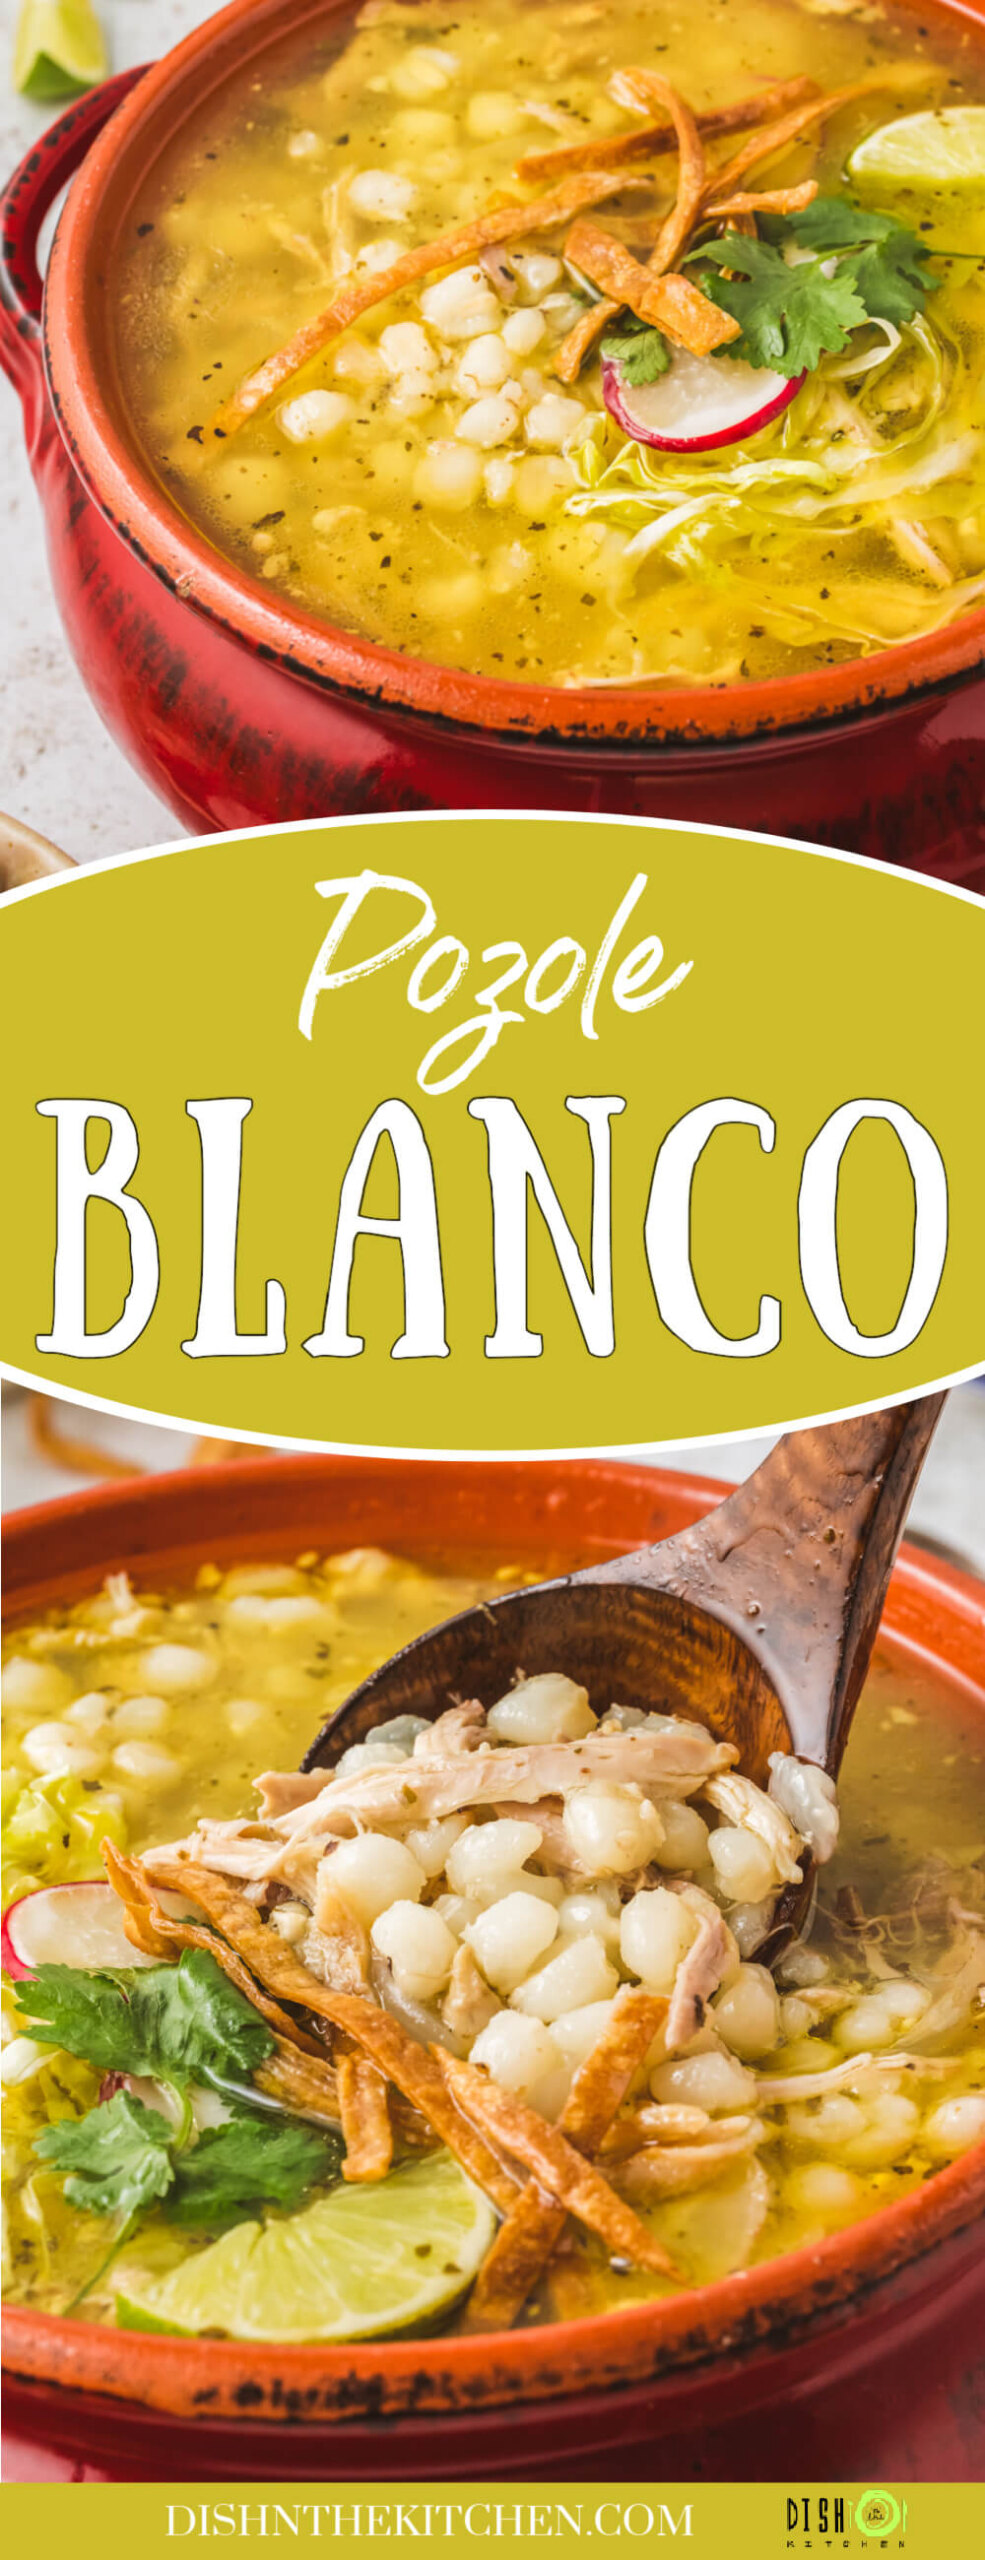 Pinterest image featuring bright terra cotta pots filled with Pozole blanco featuring white hominy, cilantro, radishes, cabbage, lime wedge, and strips of fried tortilla.